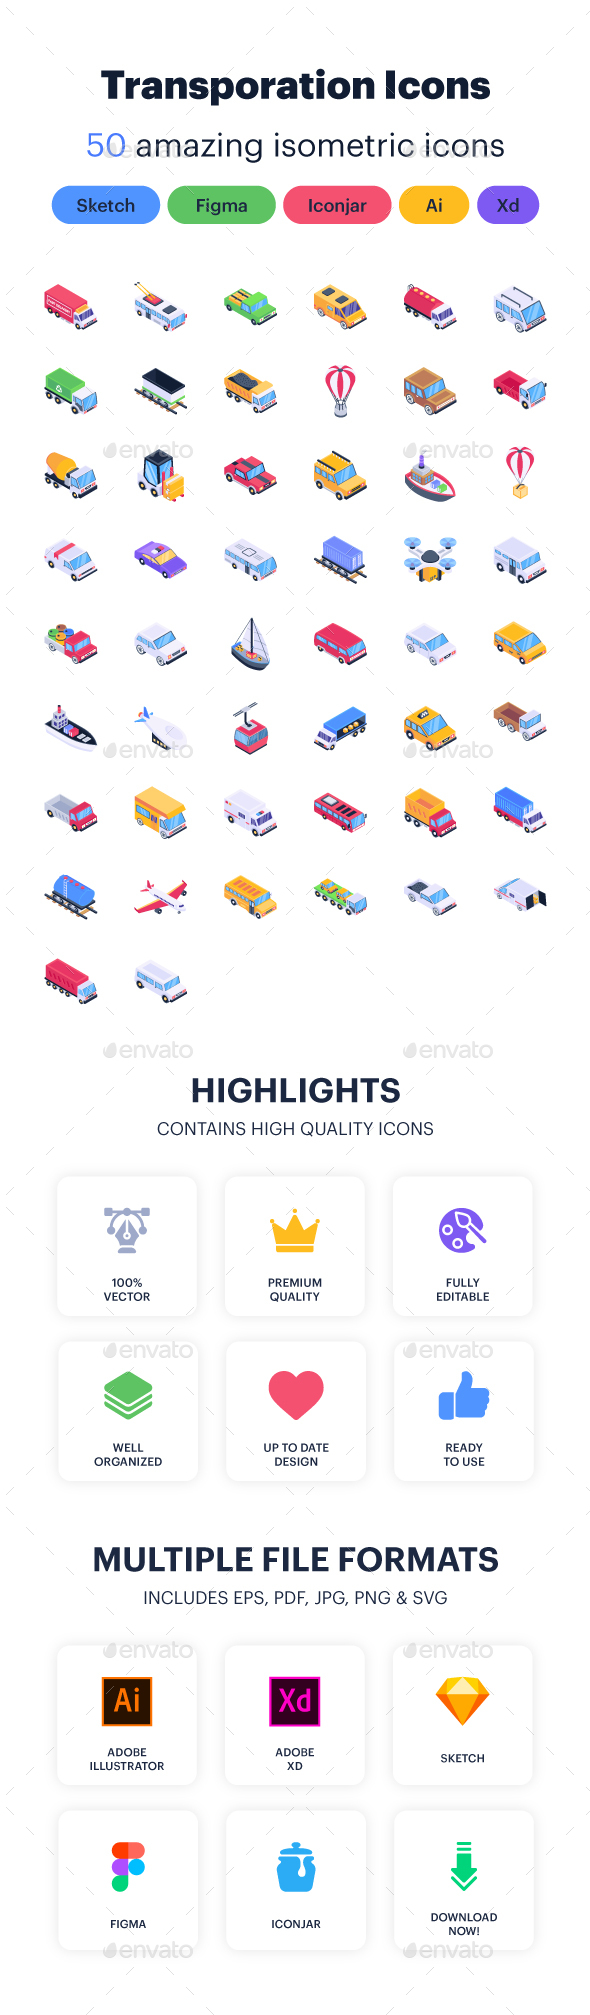 [DOWNLOAD]50 Isometric Transportation Icons